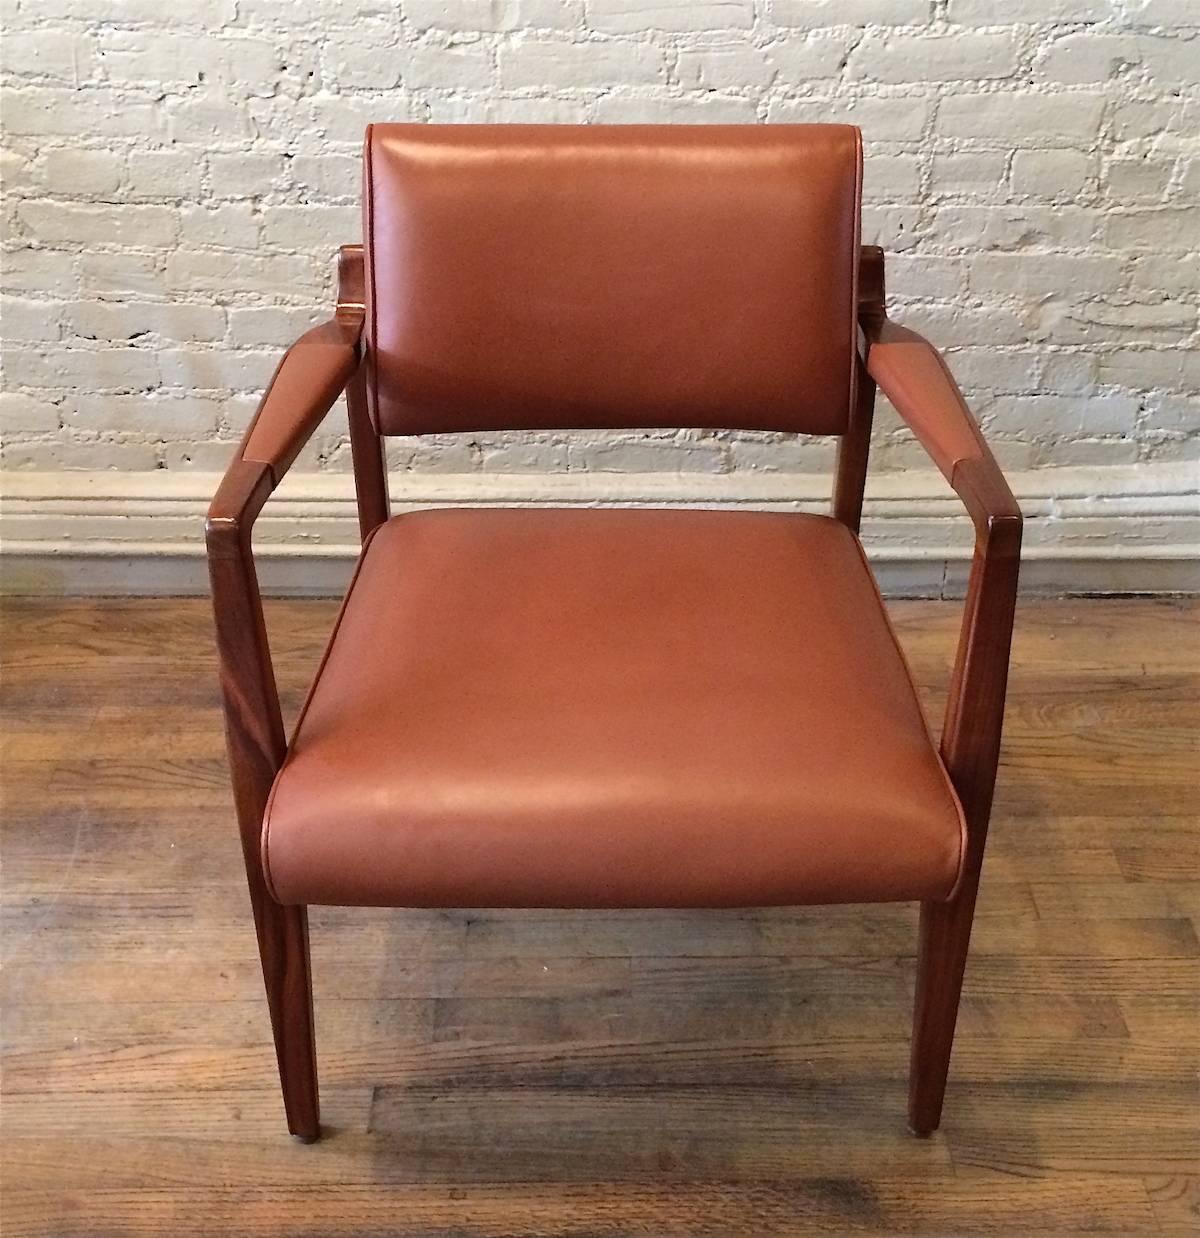 Mid-Century Modern, solid walnut armchair by Jens Risom with seat, back and arms, newly upholstered in a rich cognac leather.